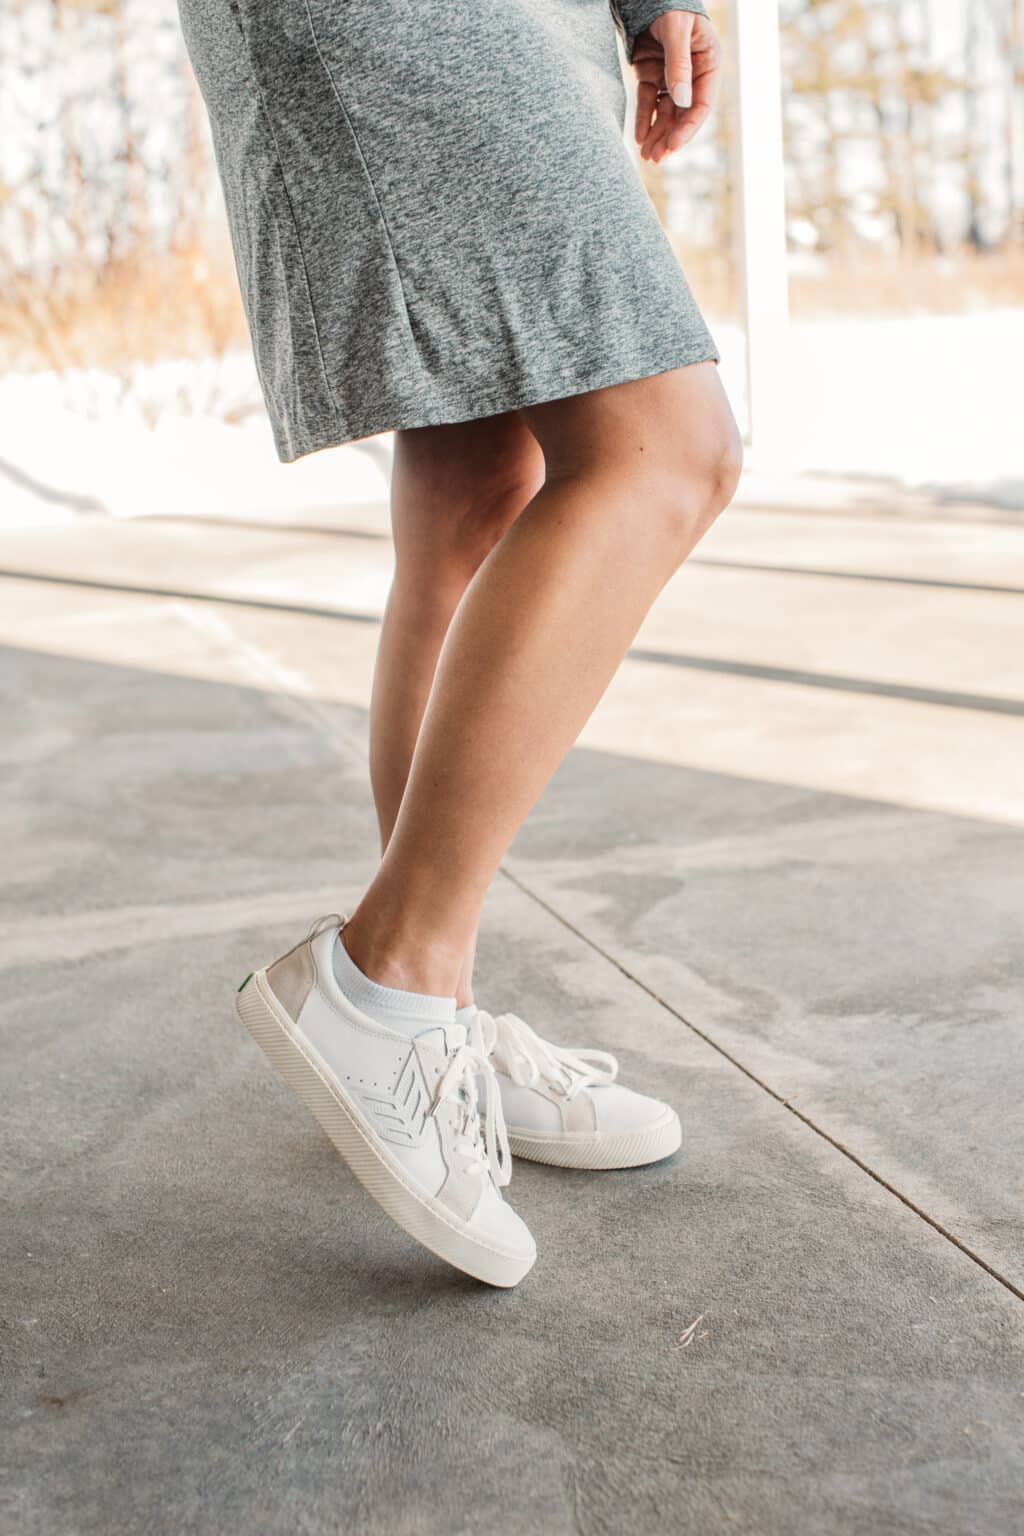 A closeup image of Lindsay's Carium sneakers. the shoes are white with off-white accents and white laces.